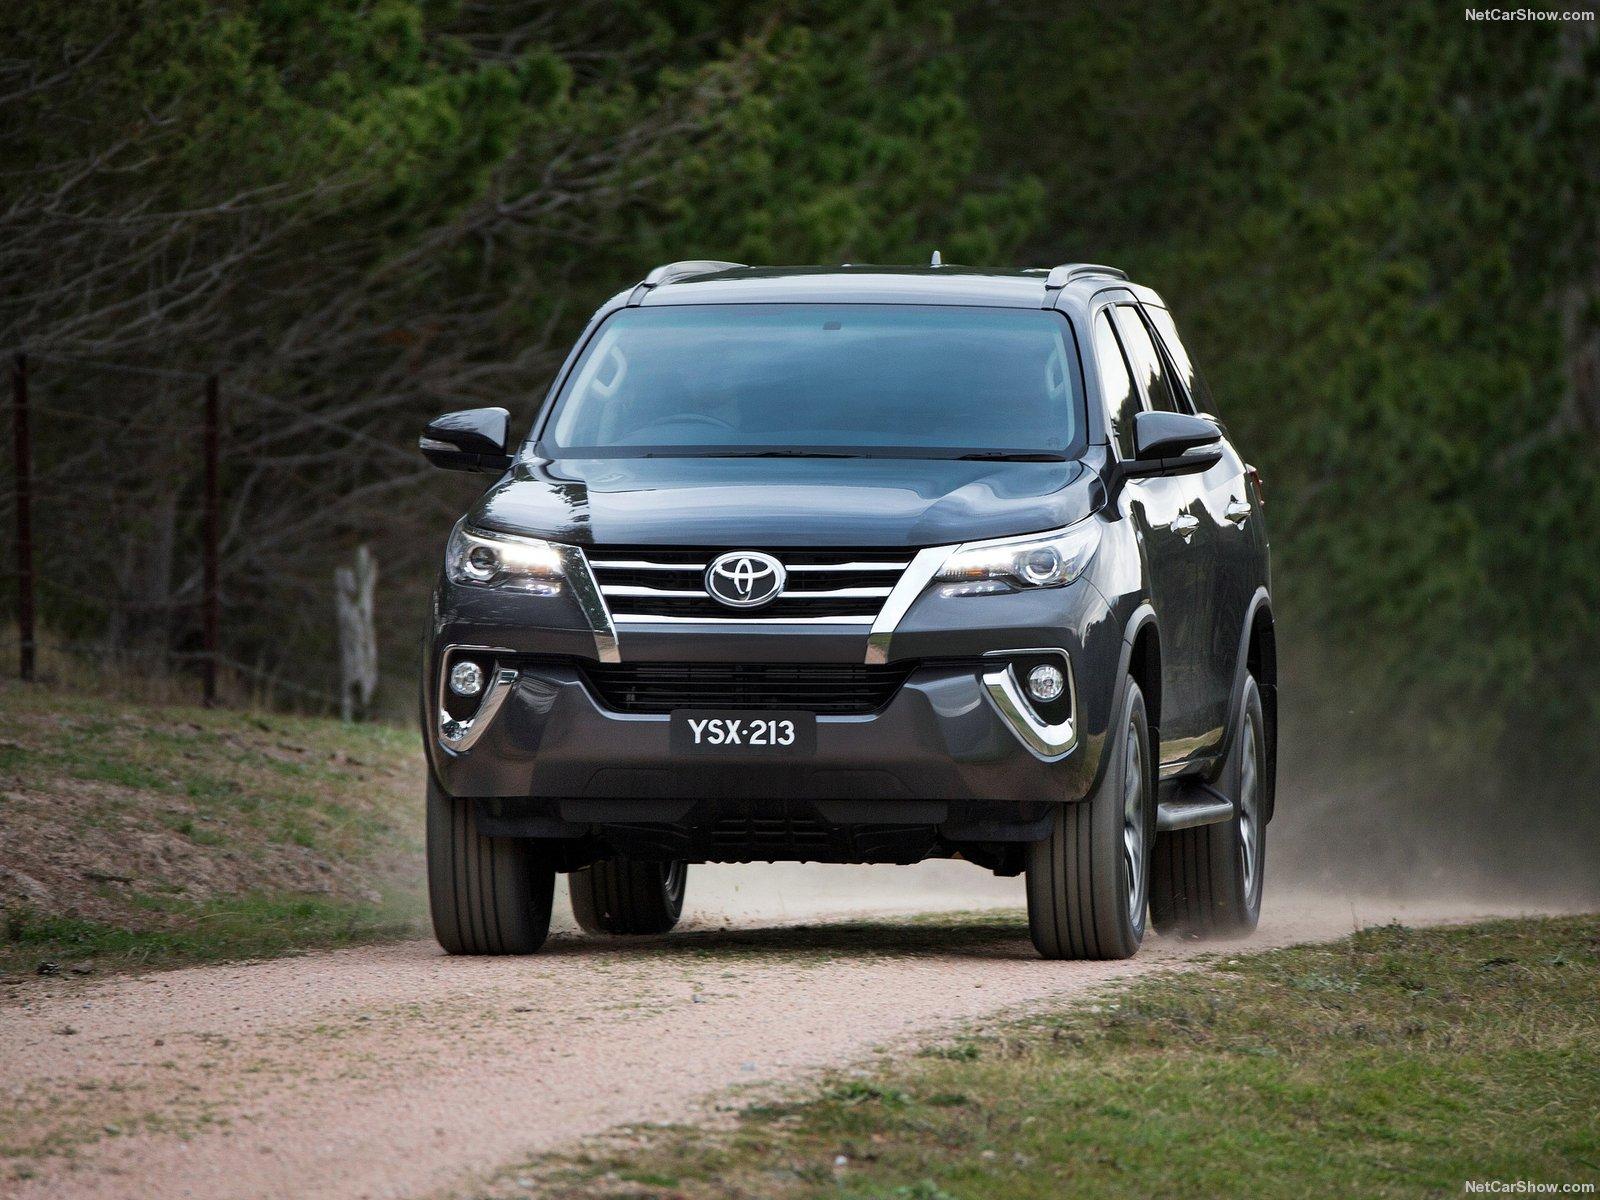 Toyota Fortuner picture. Toyota photo gallery